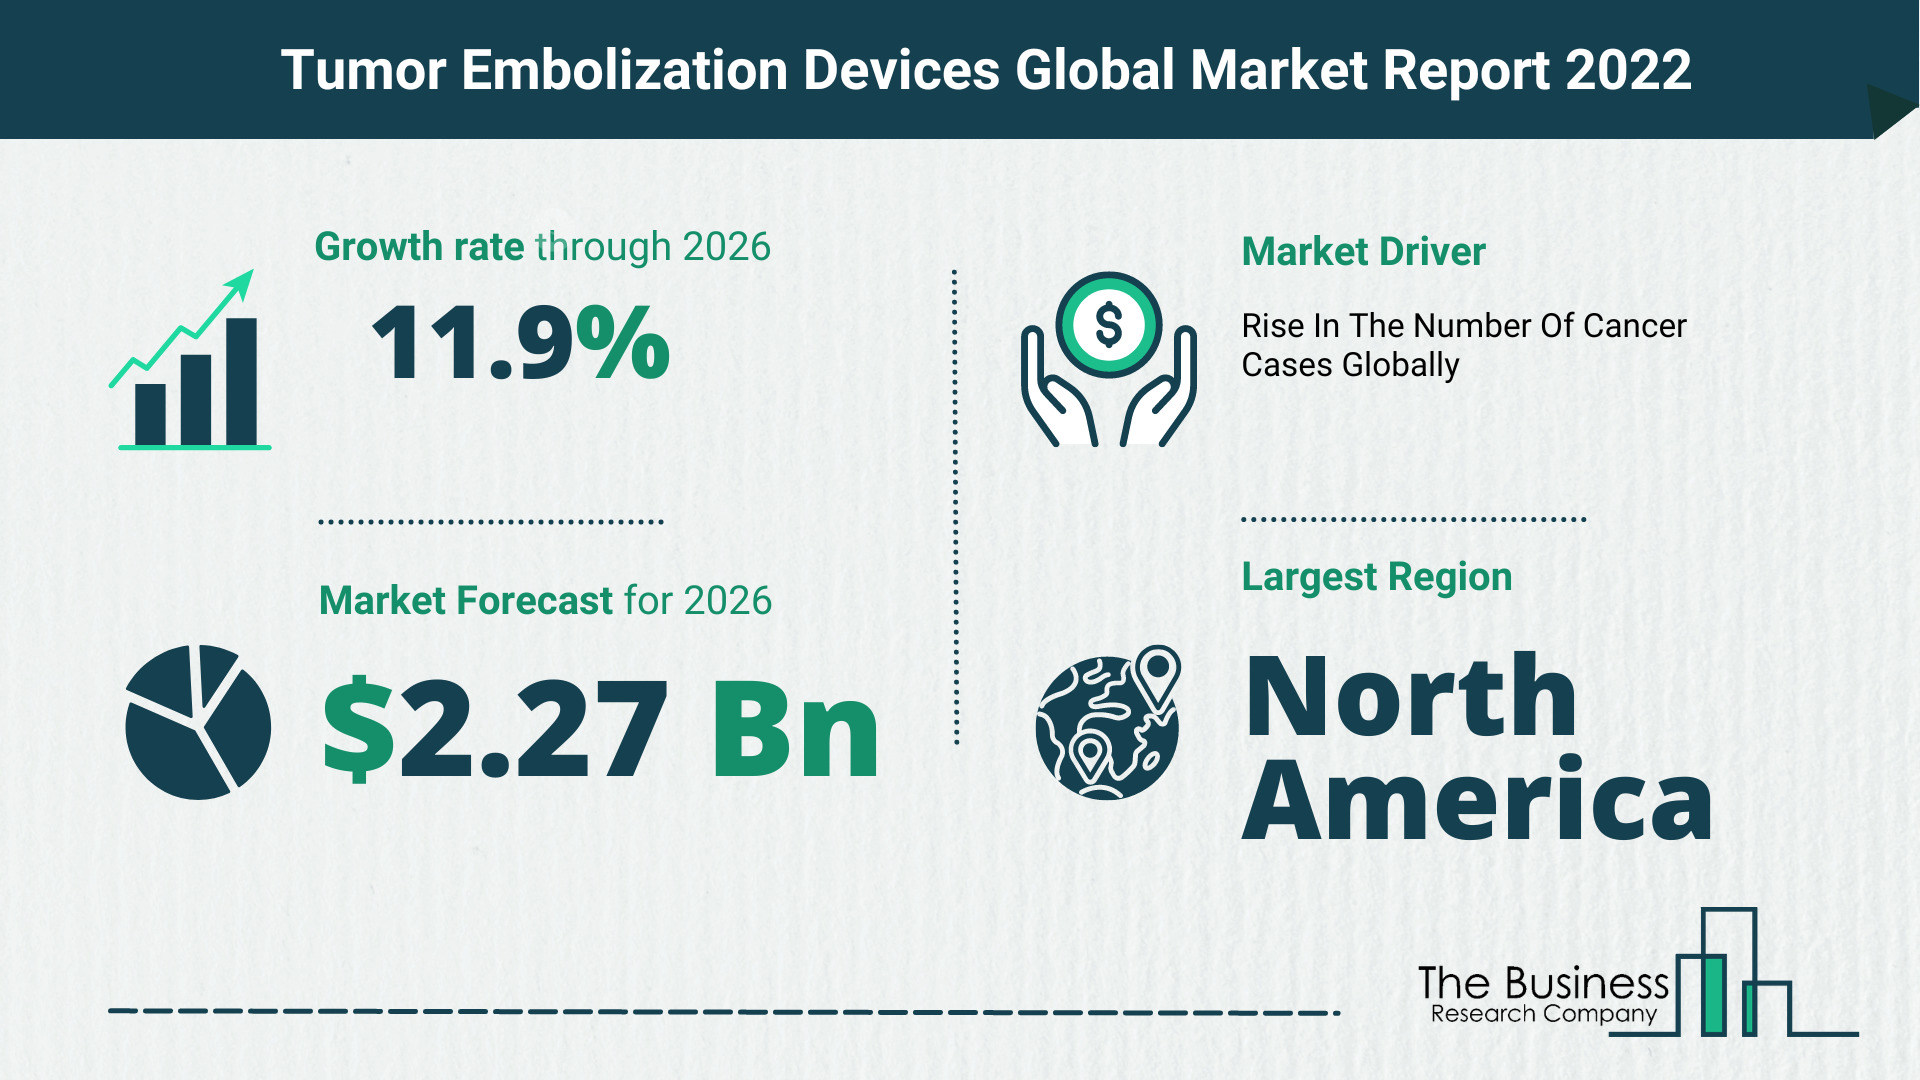 What Is The Tumor Embolization Devices Market Overview In 2022?